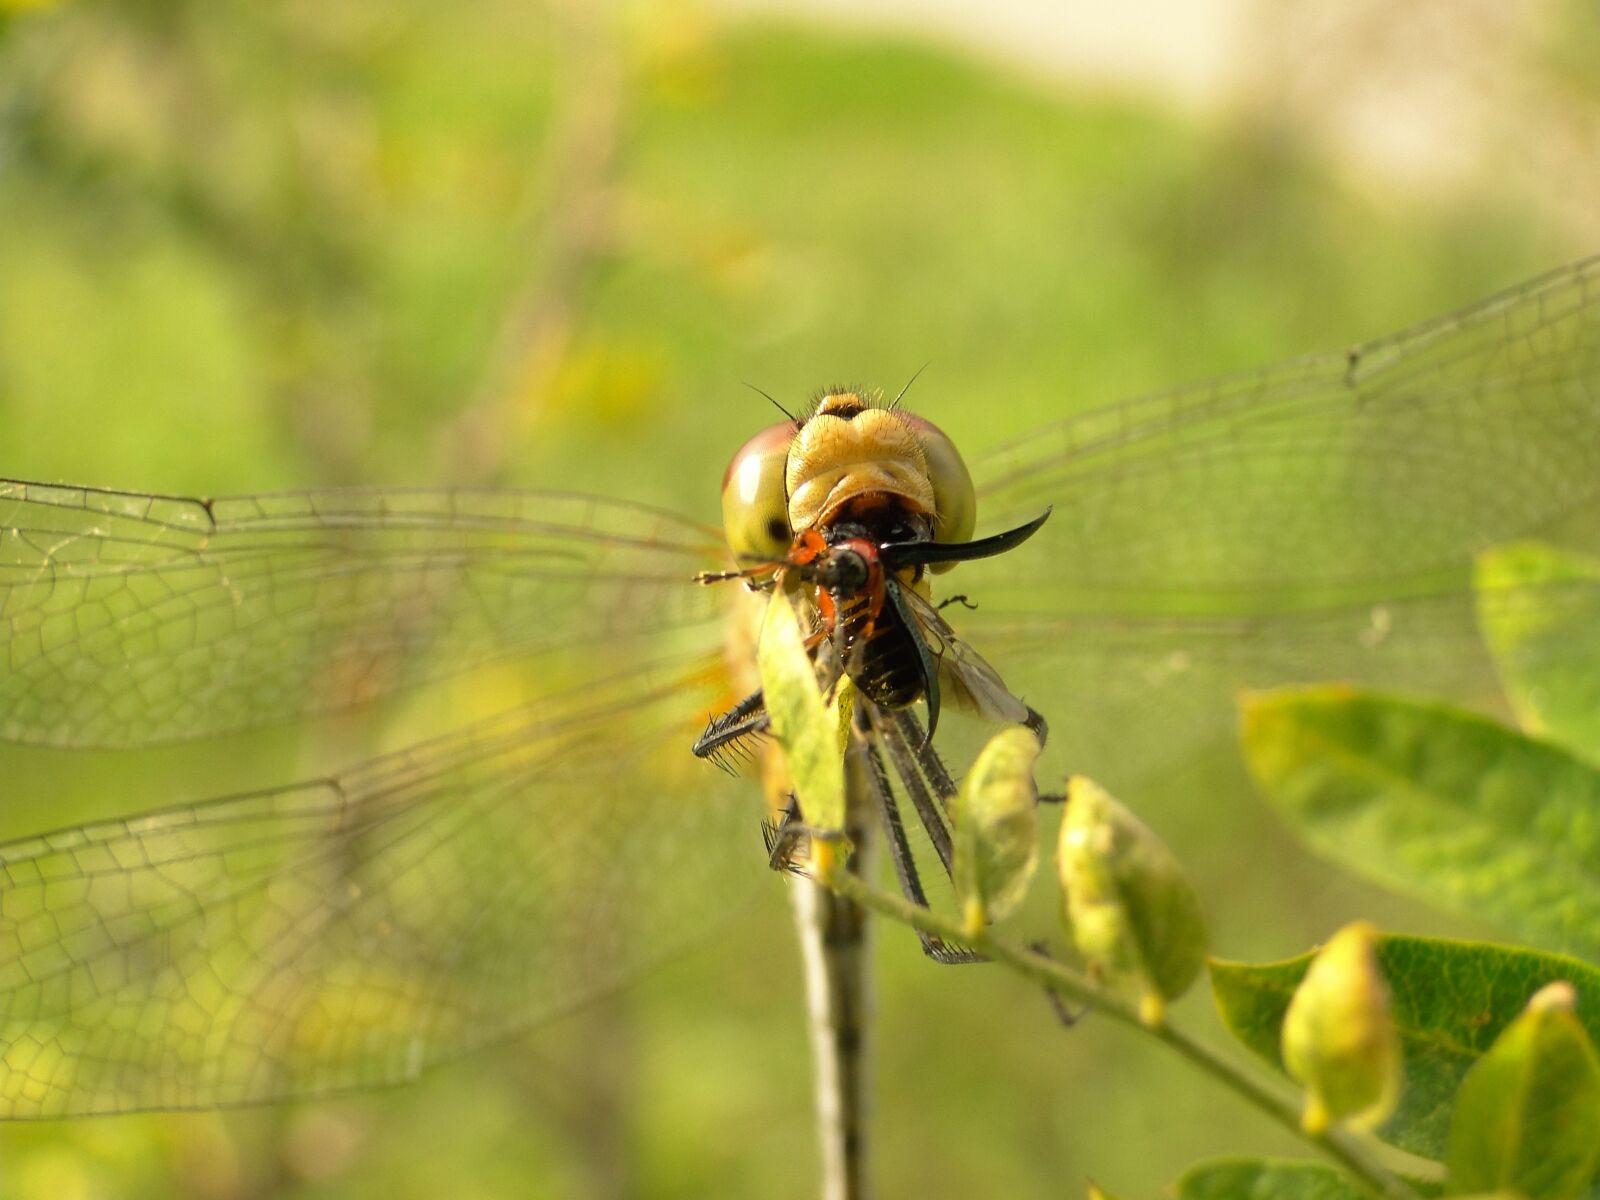 Sony Cyber-shot DSC-HX1 sample photo. Nature, insect, dragonflies r photography